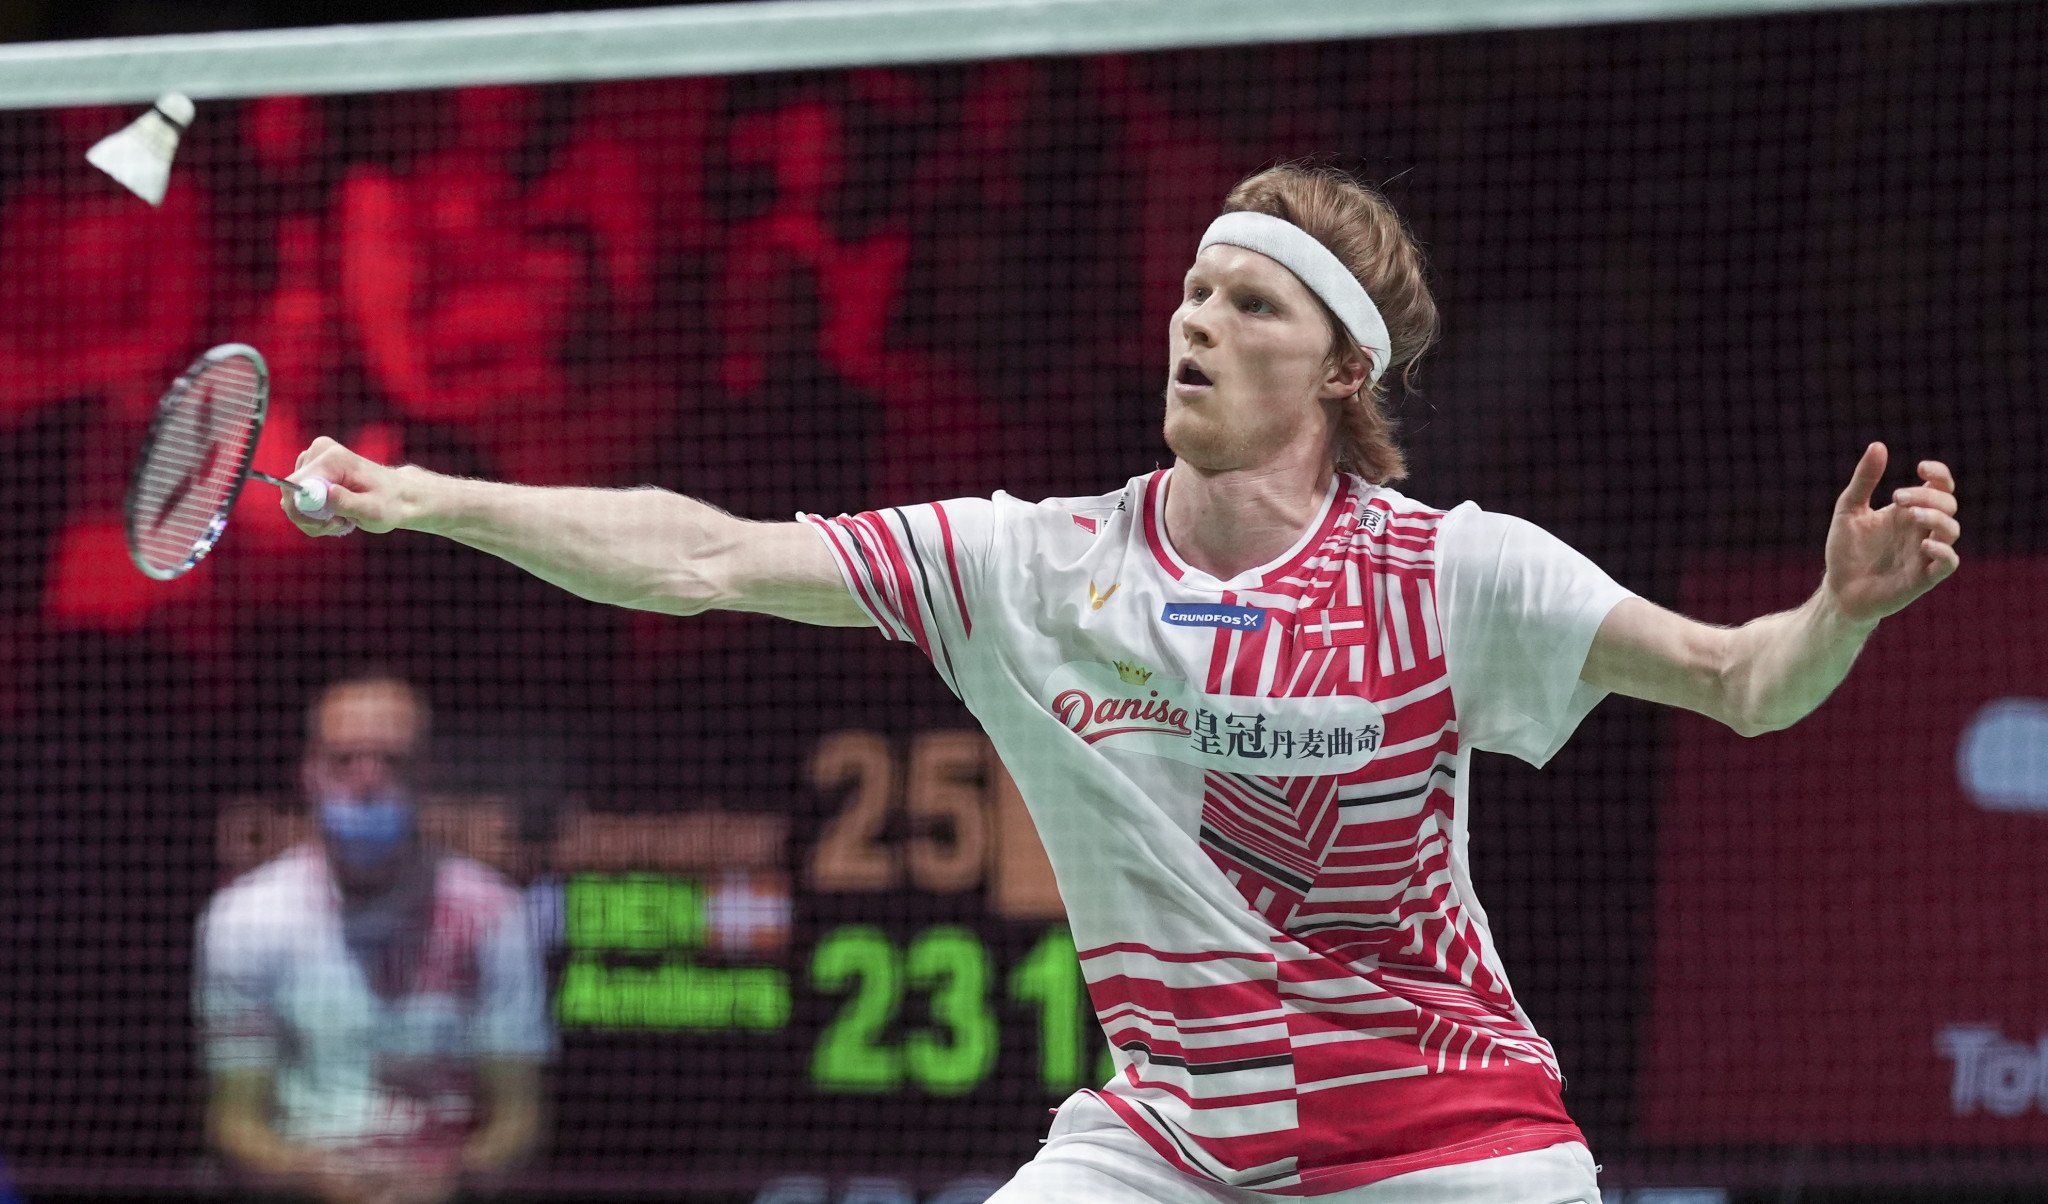 Anders Antonsen remains the top seed remaining in the men's singles tournament ©Getty Images